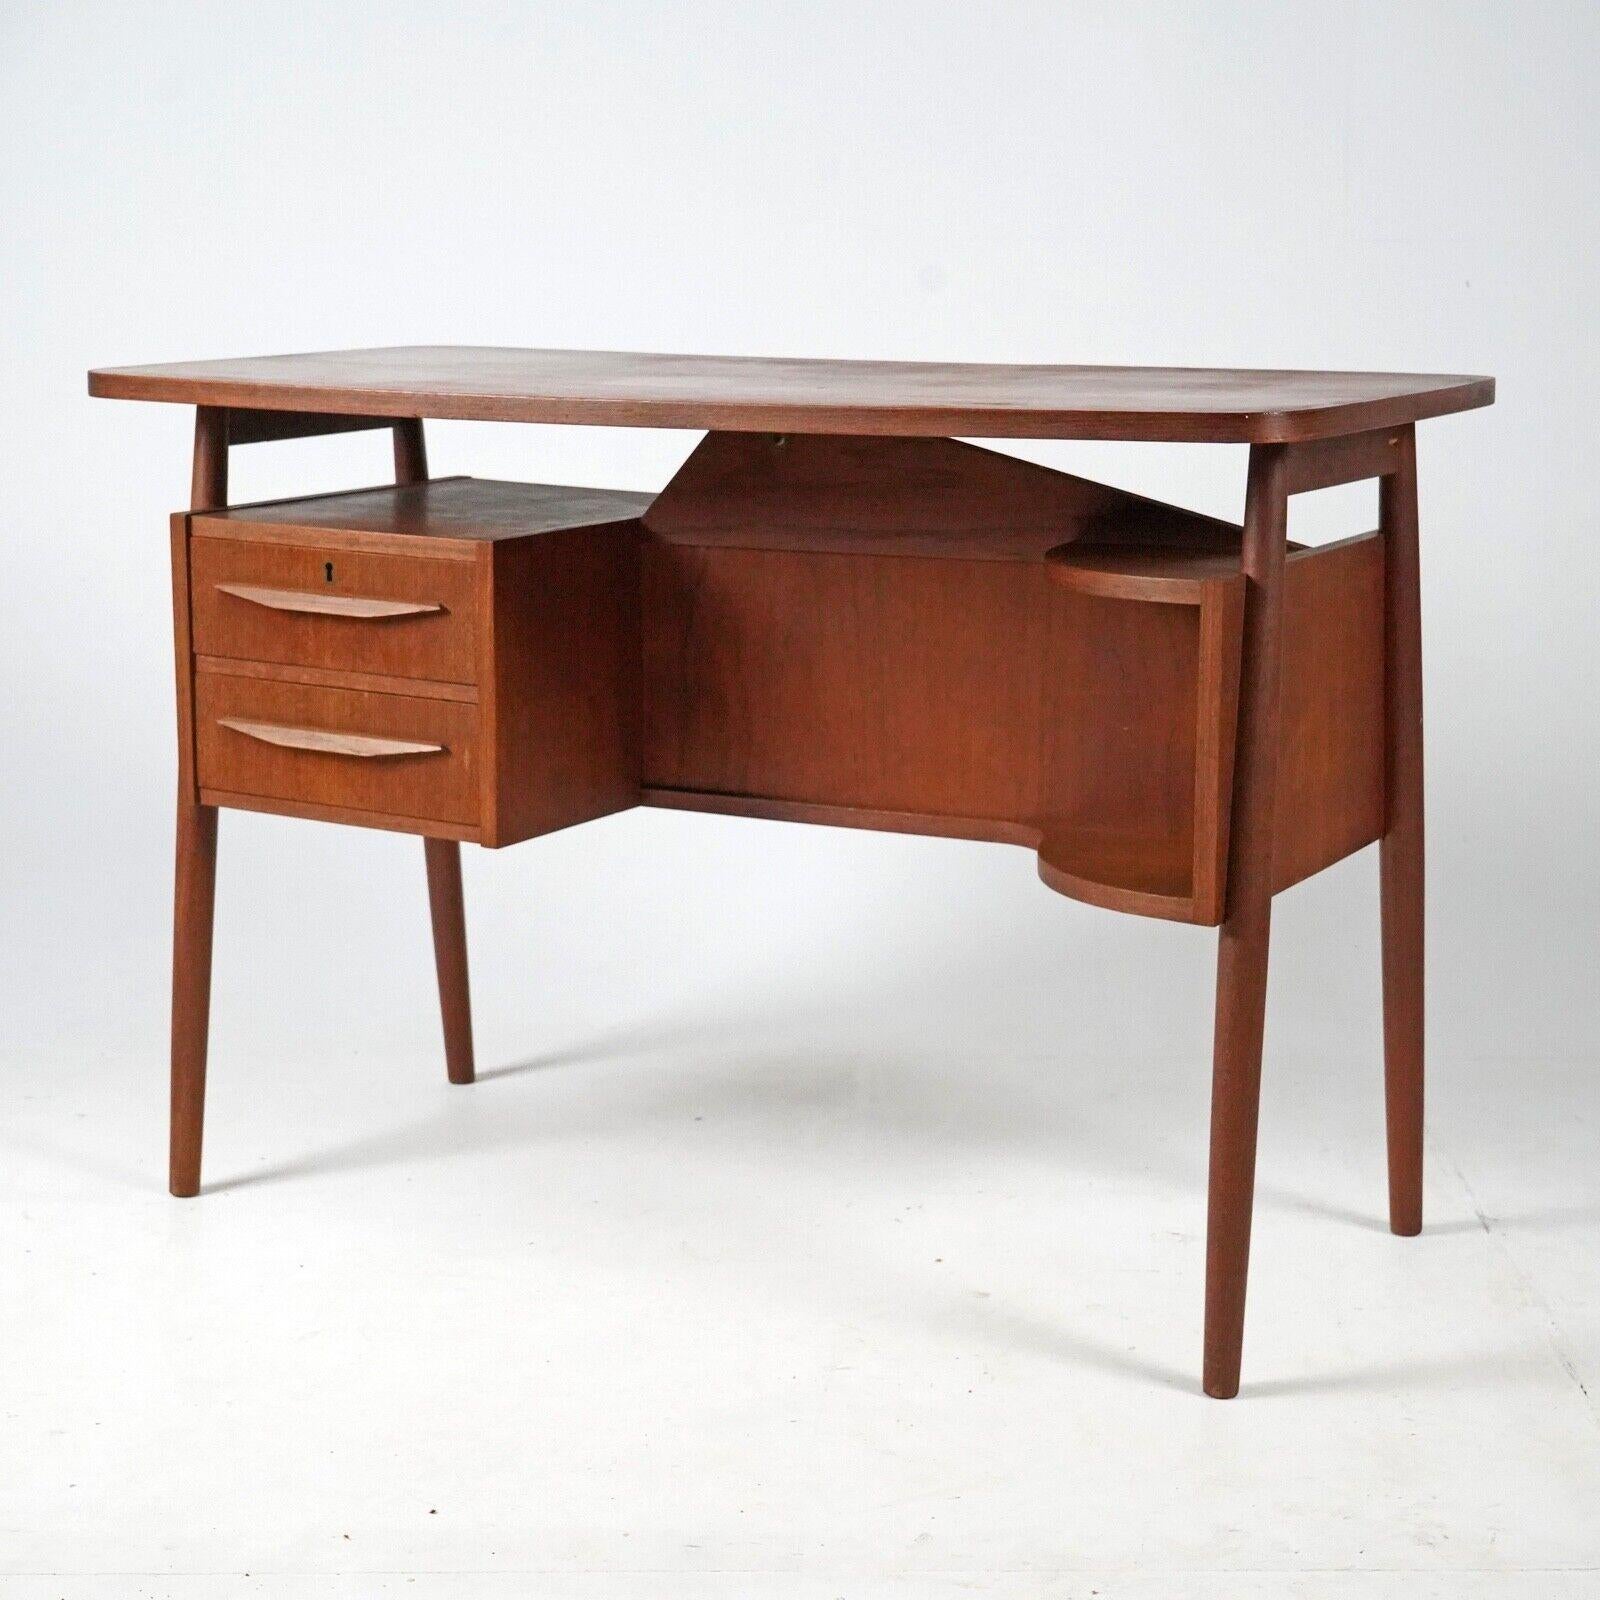 A well sized elegant desk 'Lady Desk' by Gunnar Neilson for Tibergaard. A great piece that has amble storage with two drawers and a rounded shelf on the front. On the back making it attractive from all angles is a further shelf/storage space. The